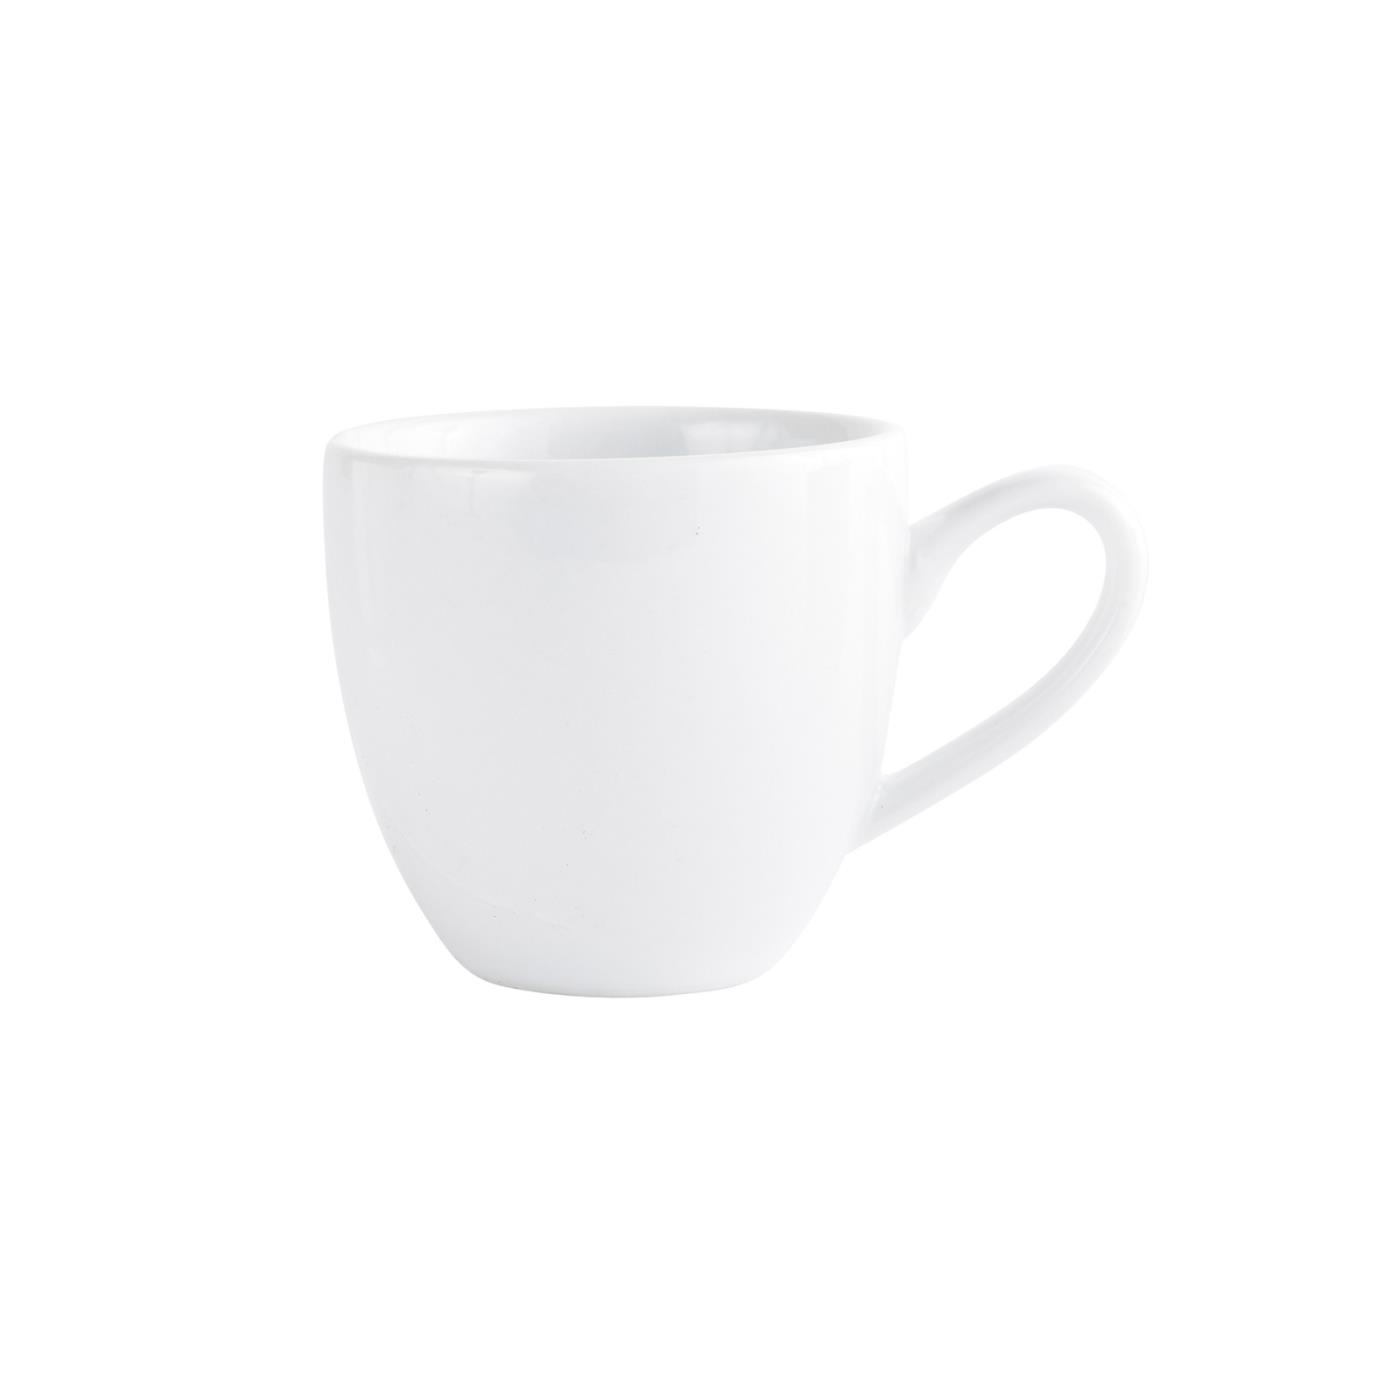 White Coupe Collection -  White Coupe Demi Cup 2oz.